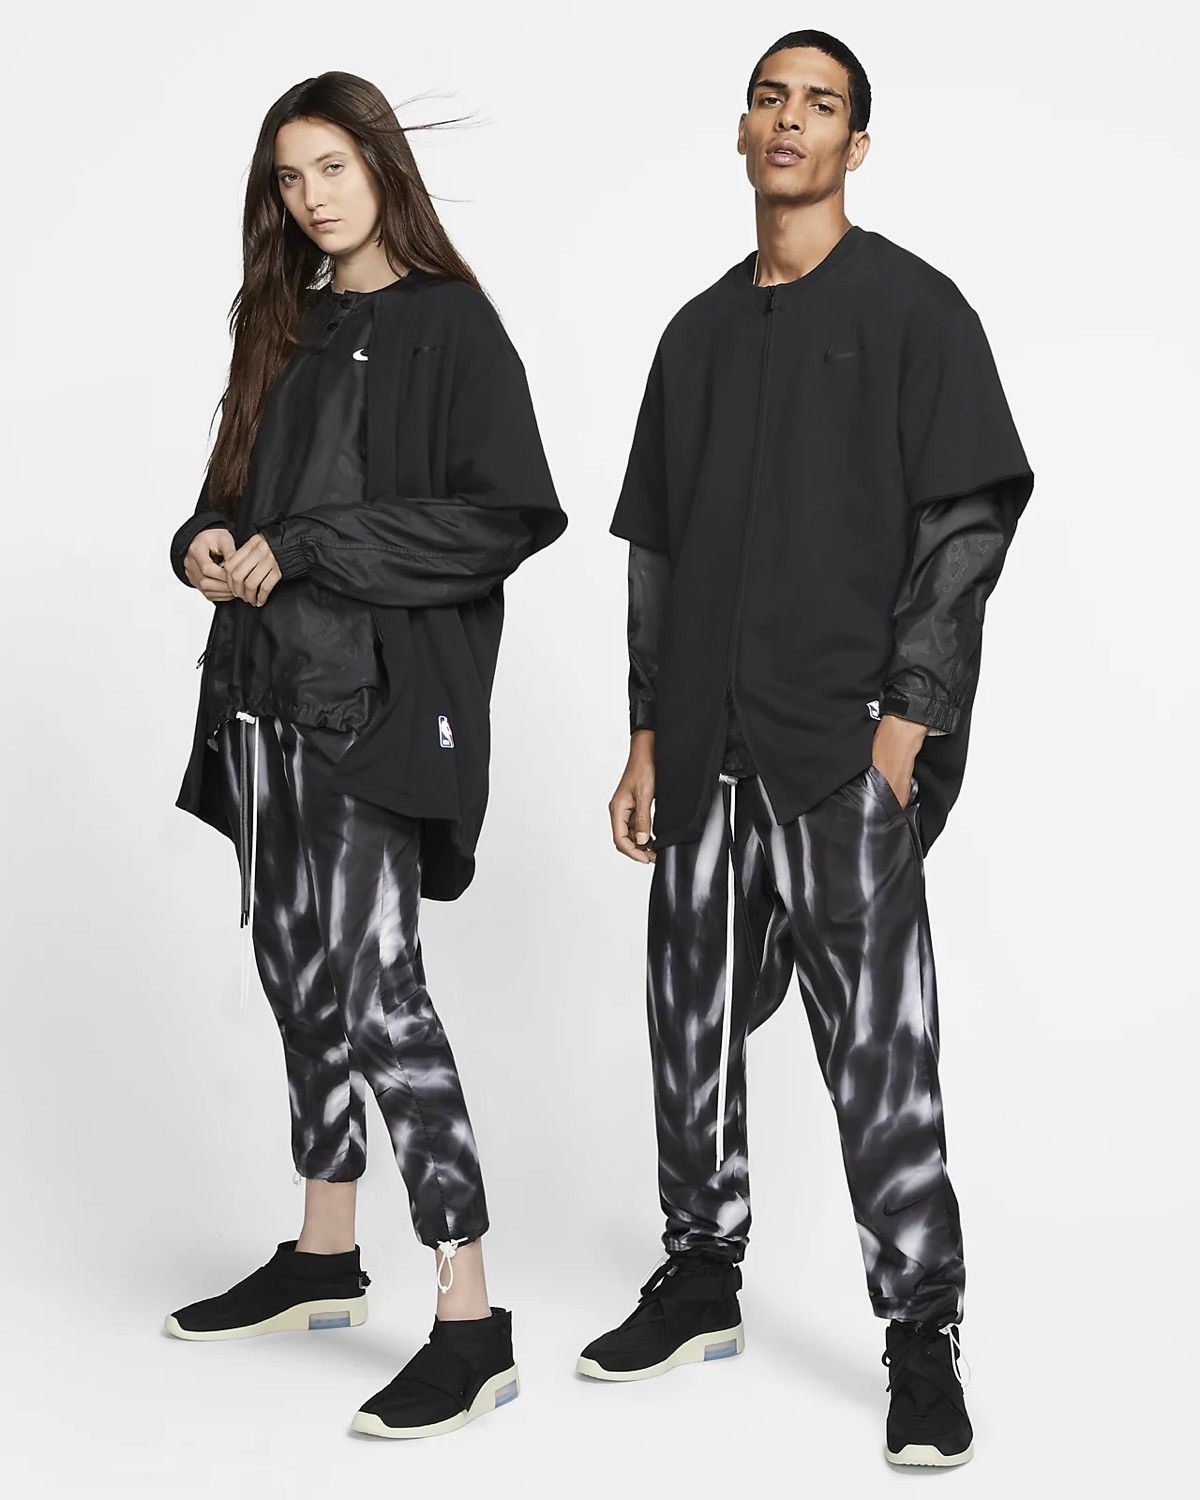 Nike Fear of God x Nike All Over print pants in Sz M (30~32) | Grailed